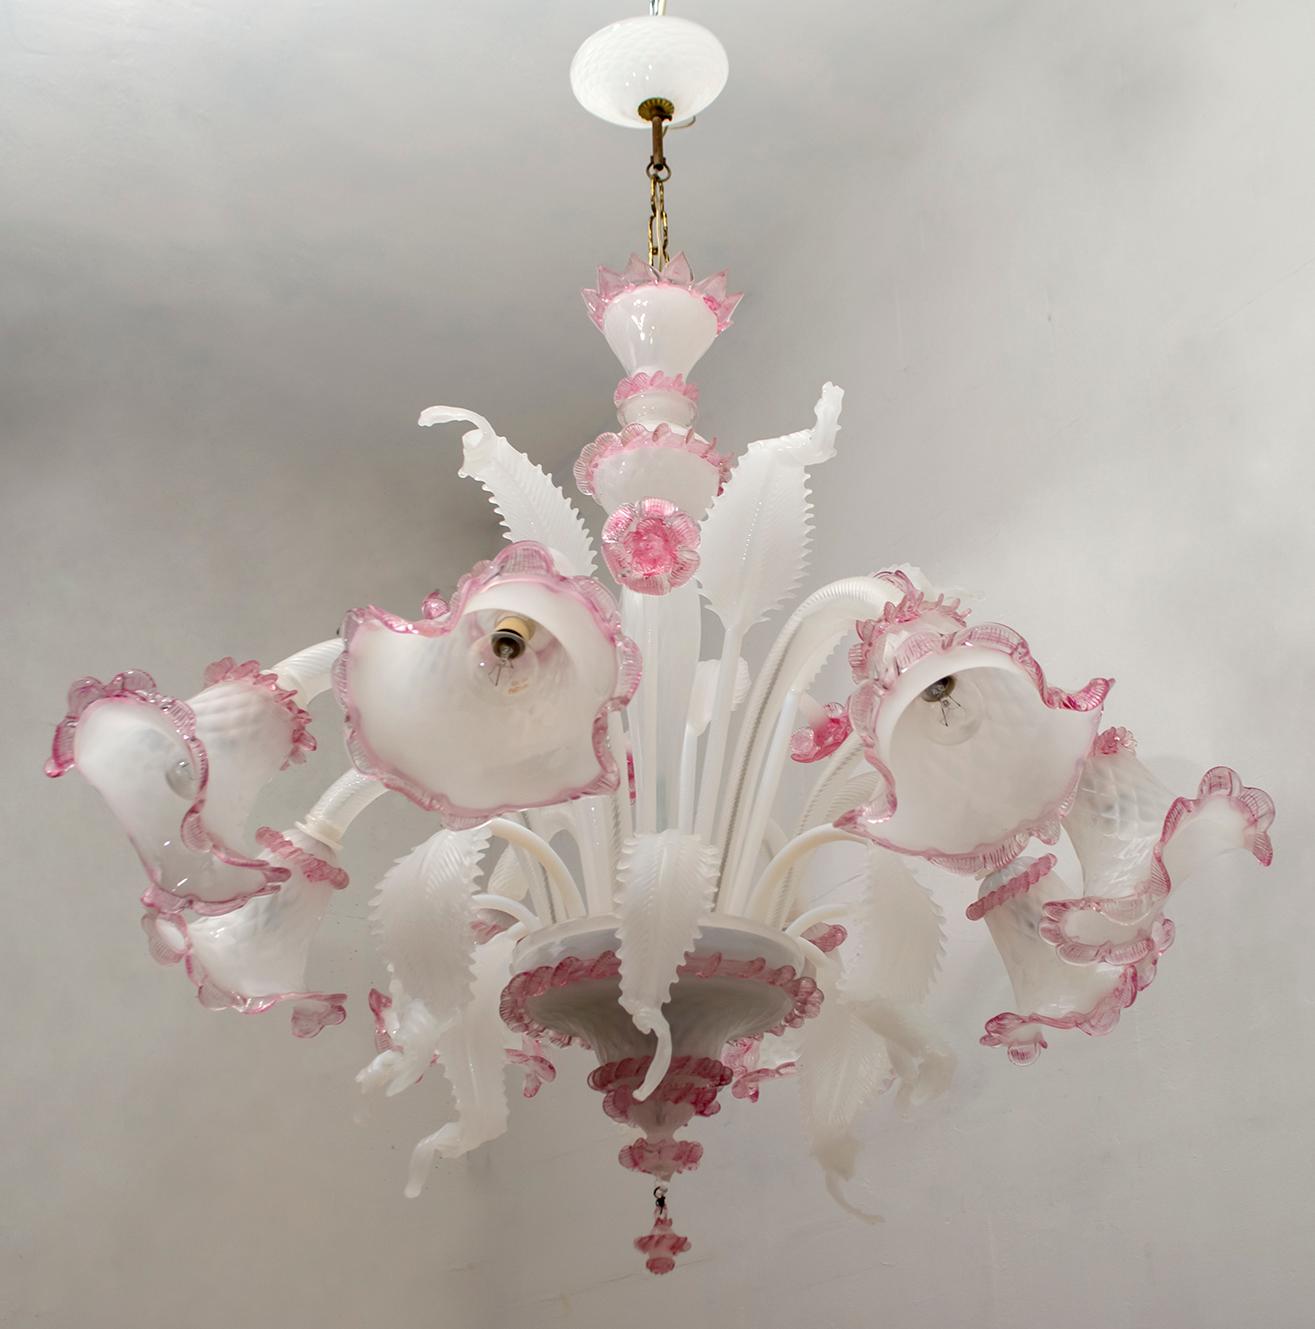 An elegant eight-light chandelier in milk-colored Murano glass and sophisticated fuchsia pink finishes. With a centered bulbous column that emits branches and flowers and finely cuts the Murano glass leaves.


Ca'Rezzonico is the name of a